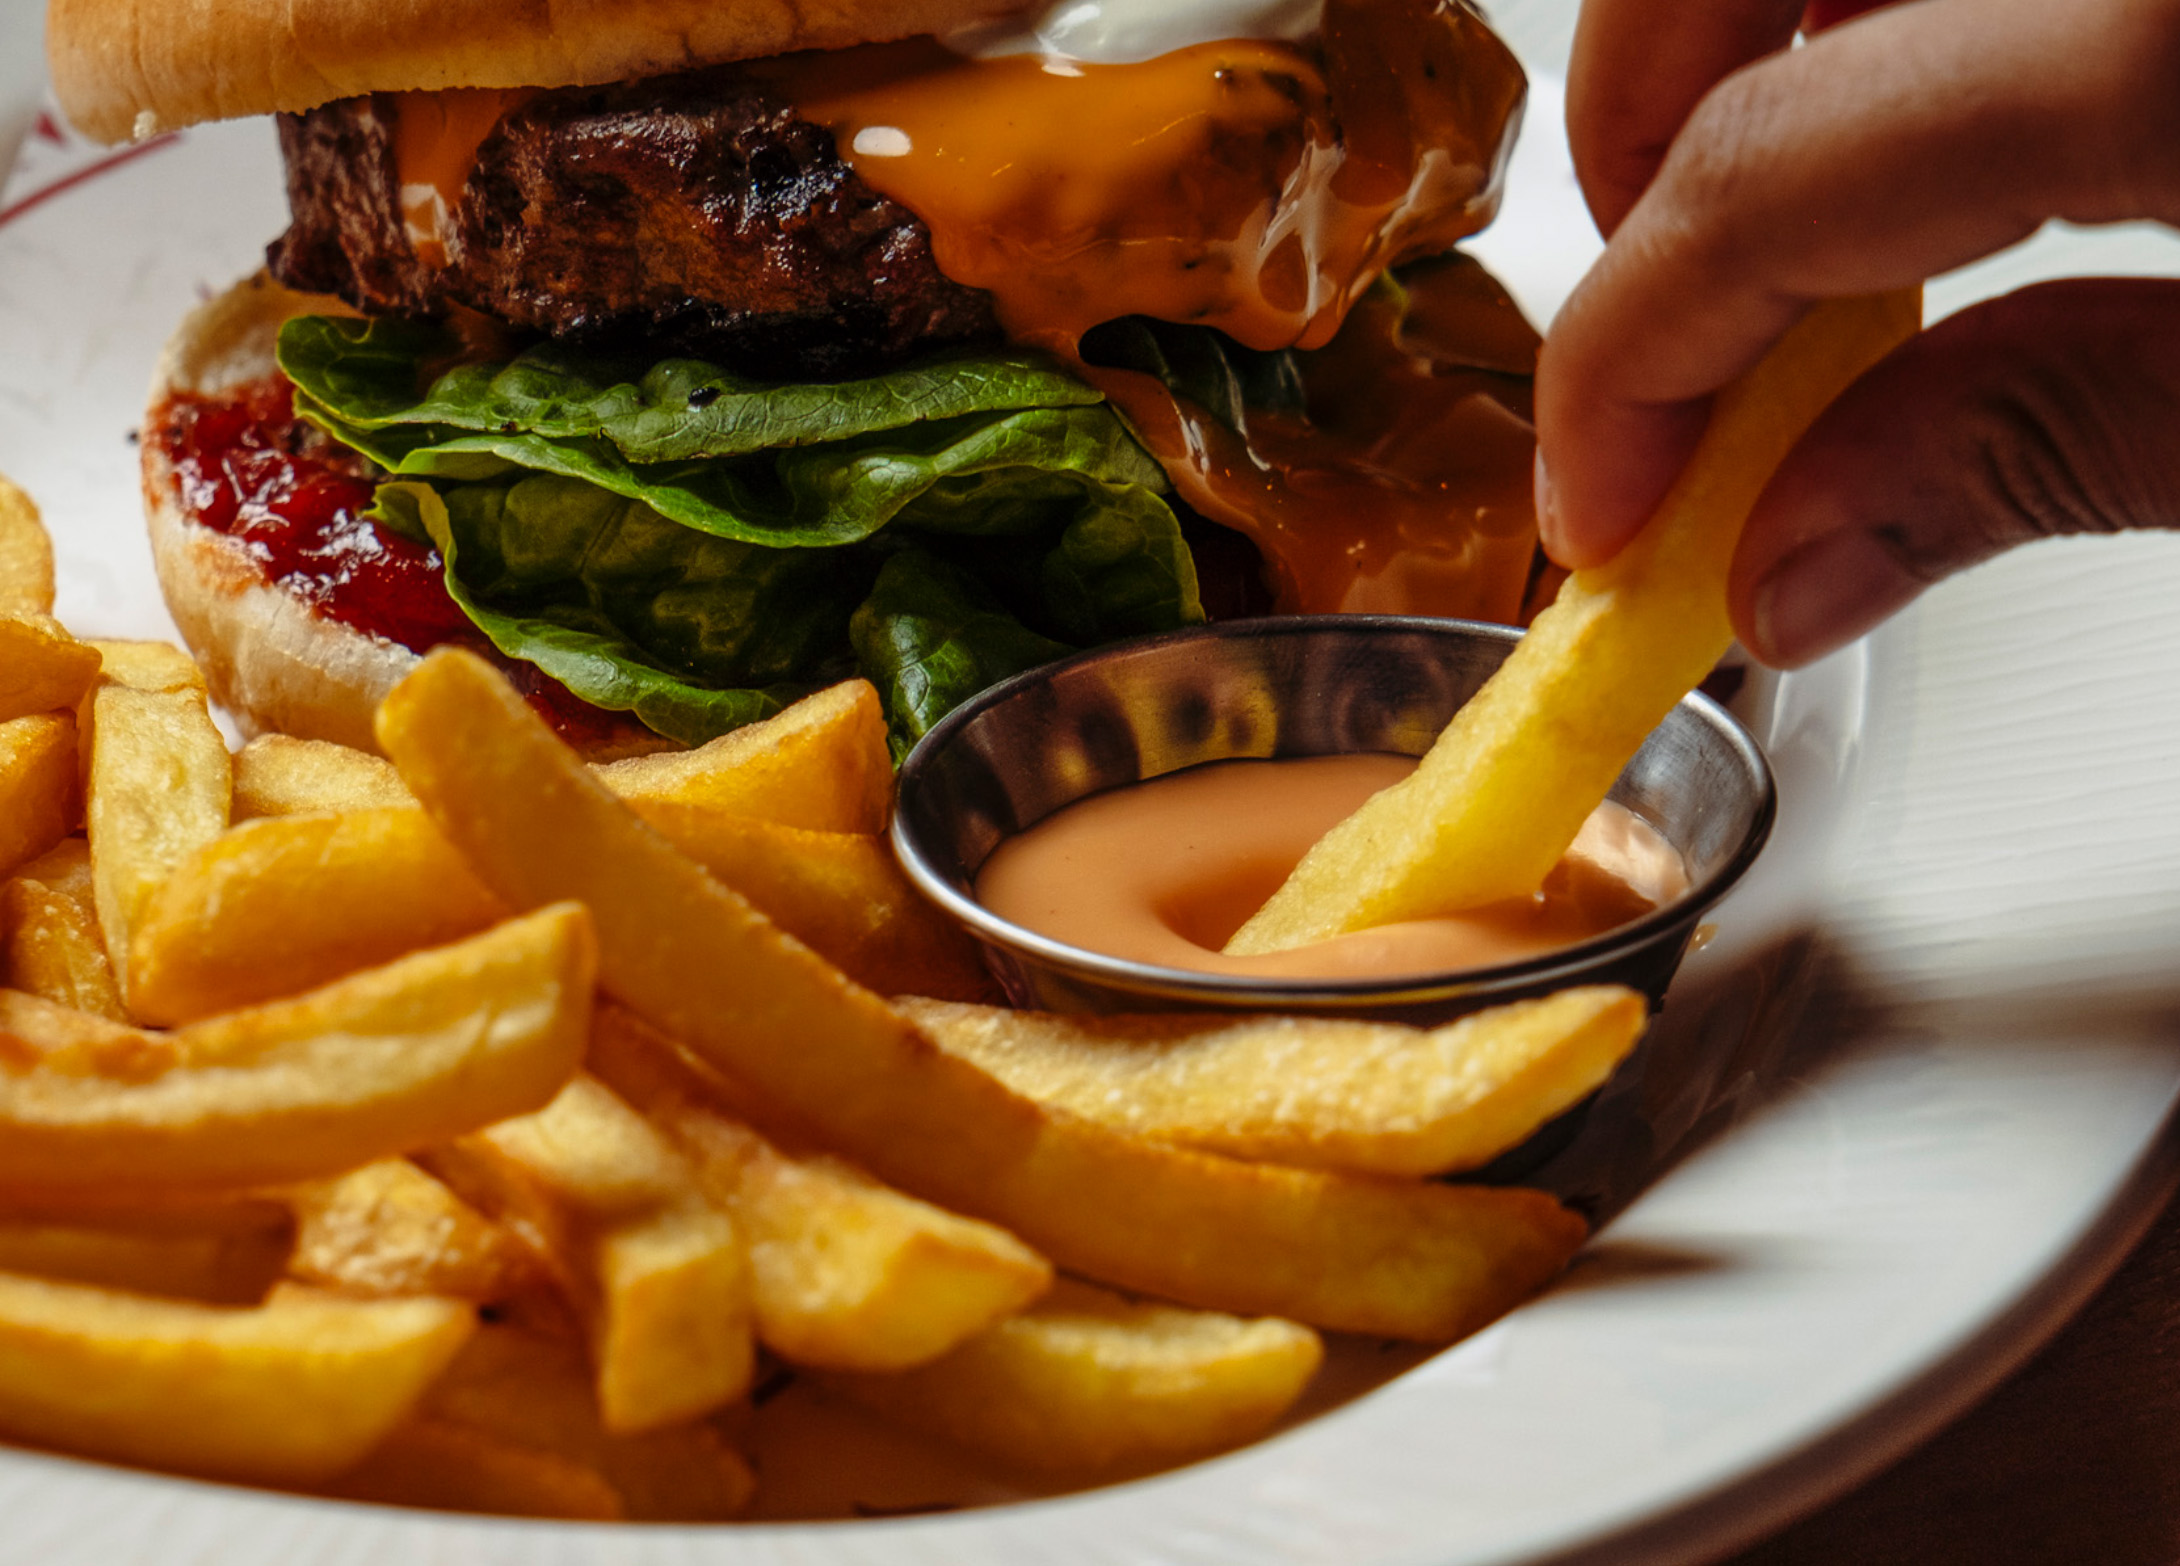 A person is dipping chips into a cheesy sauce with a delicious hamburger in the background.